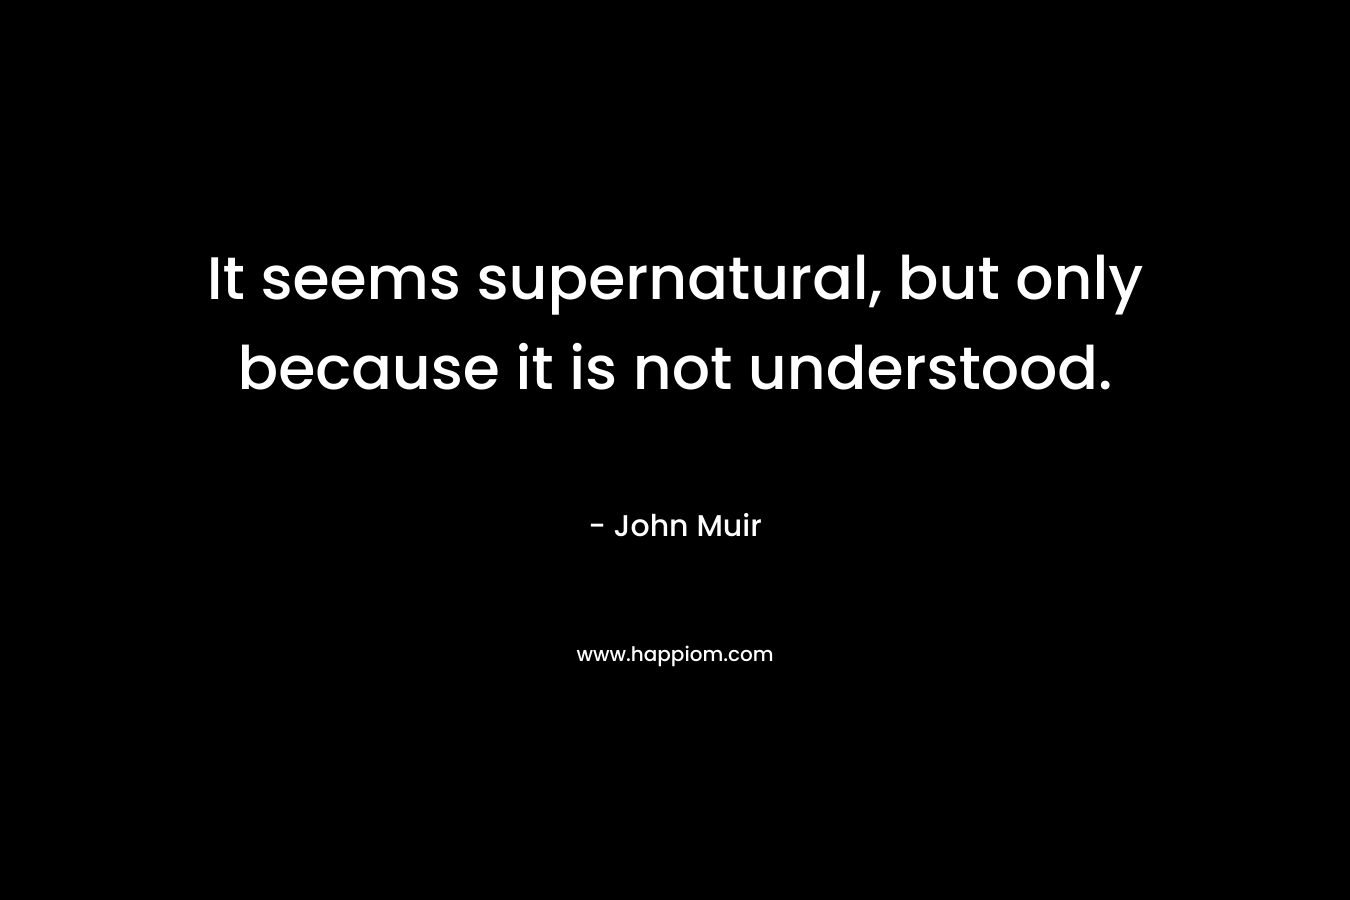 It seems supernatural, but only because it is not understood.